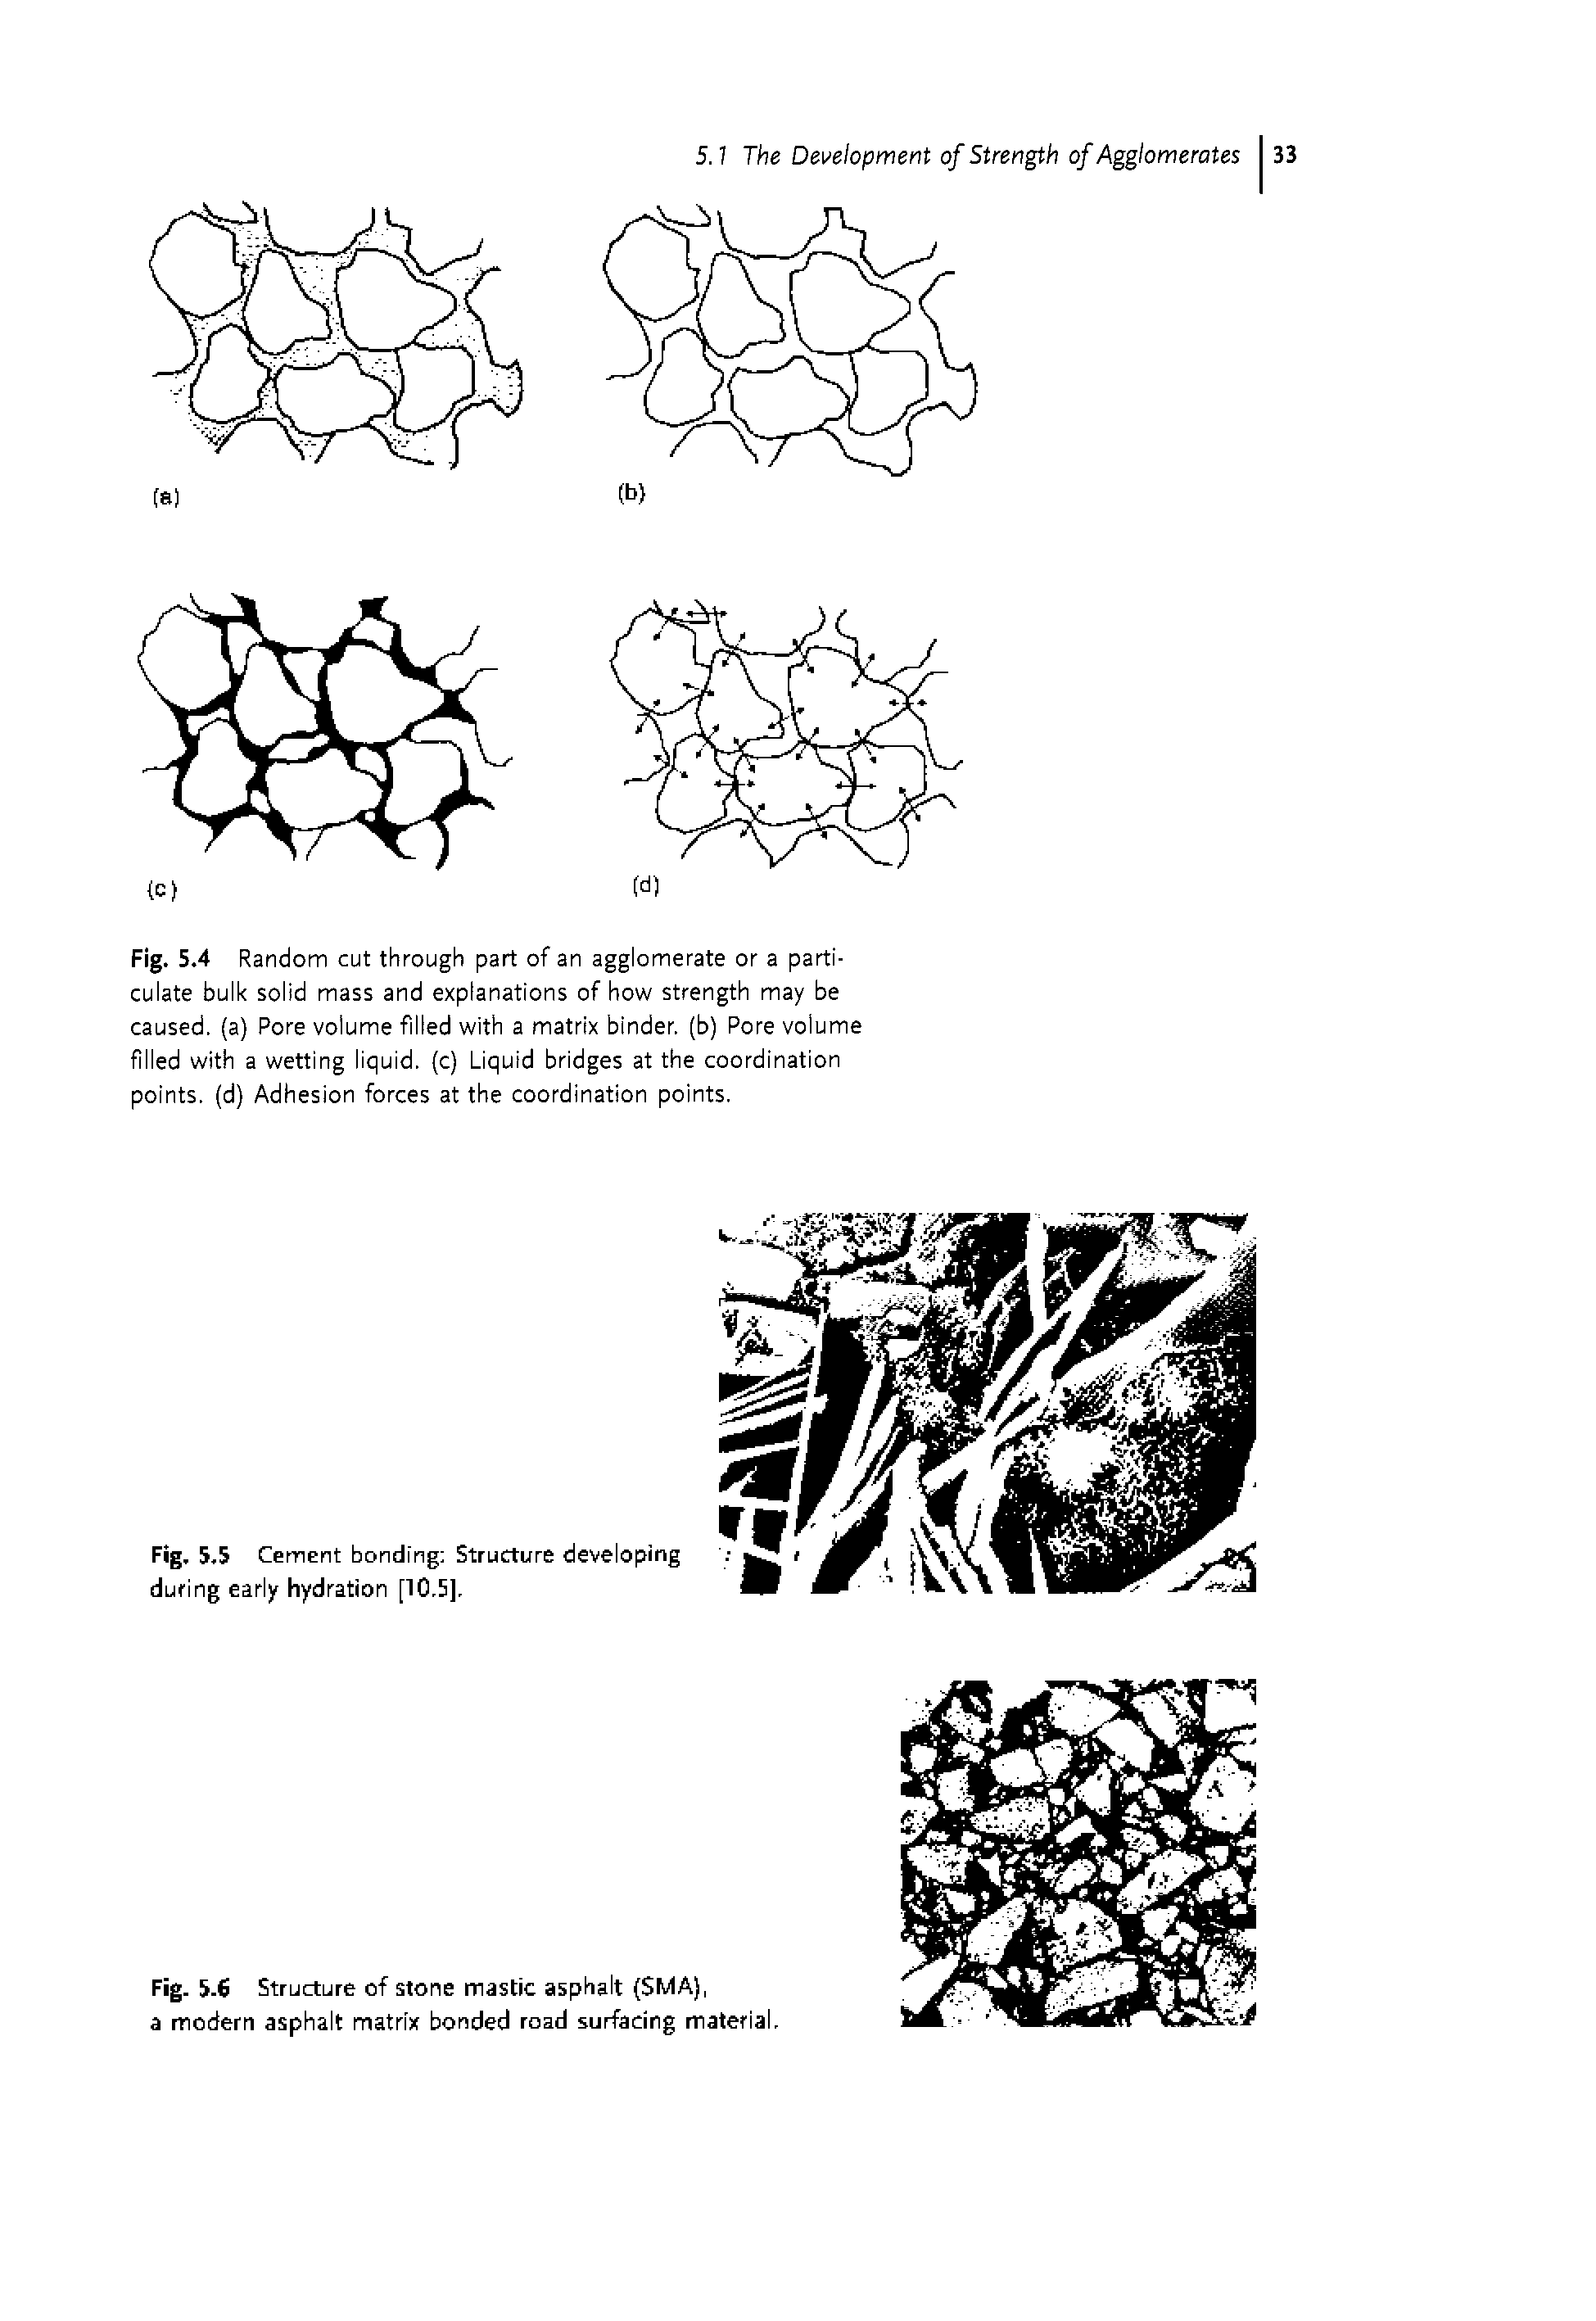 Fig. 5.4 Random cut through part of an agglomerate or a particulate bulk solid mass and explanations of how strength may be caused, (a) Pore volume filled with a matrix binder, (b) Pore volume filled with a wetting liquid, (c) Liquid bridges at the coordination points, (d) Adhesion forces at the coordination points.